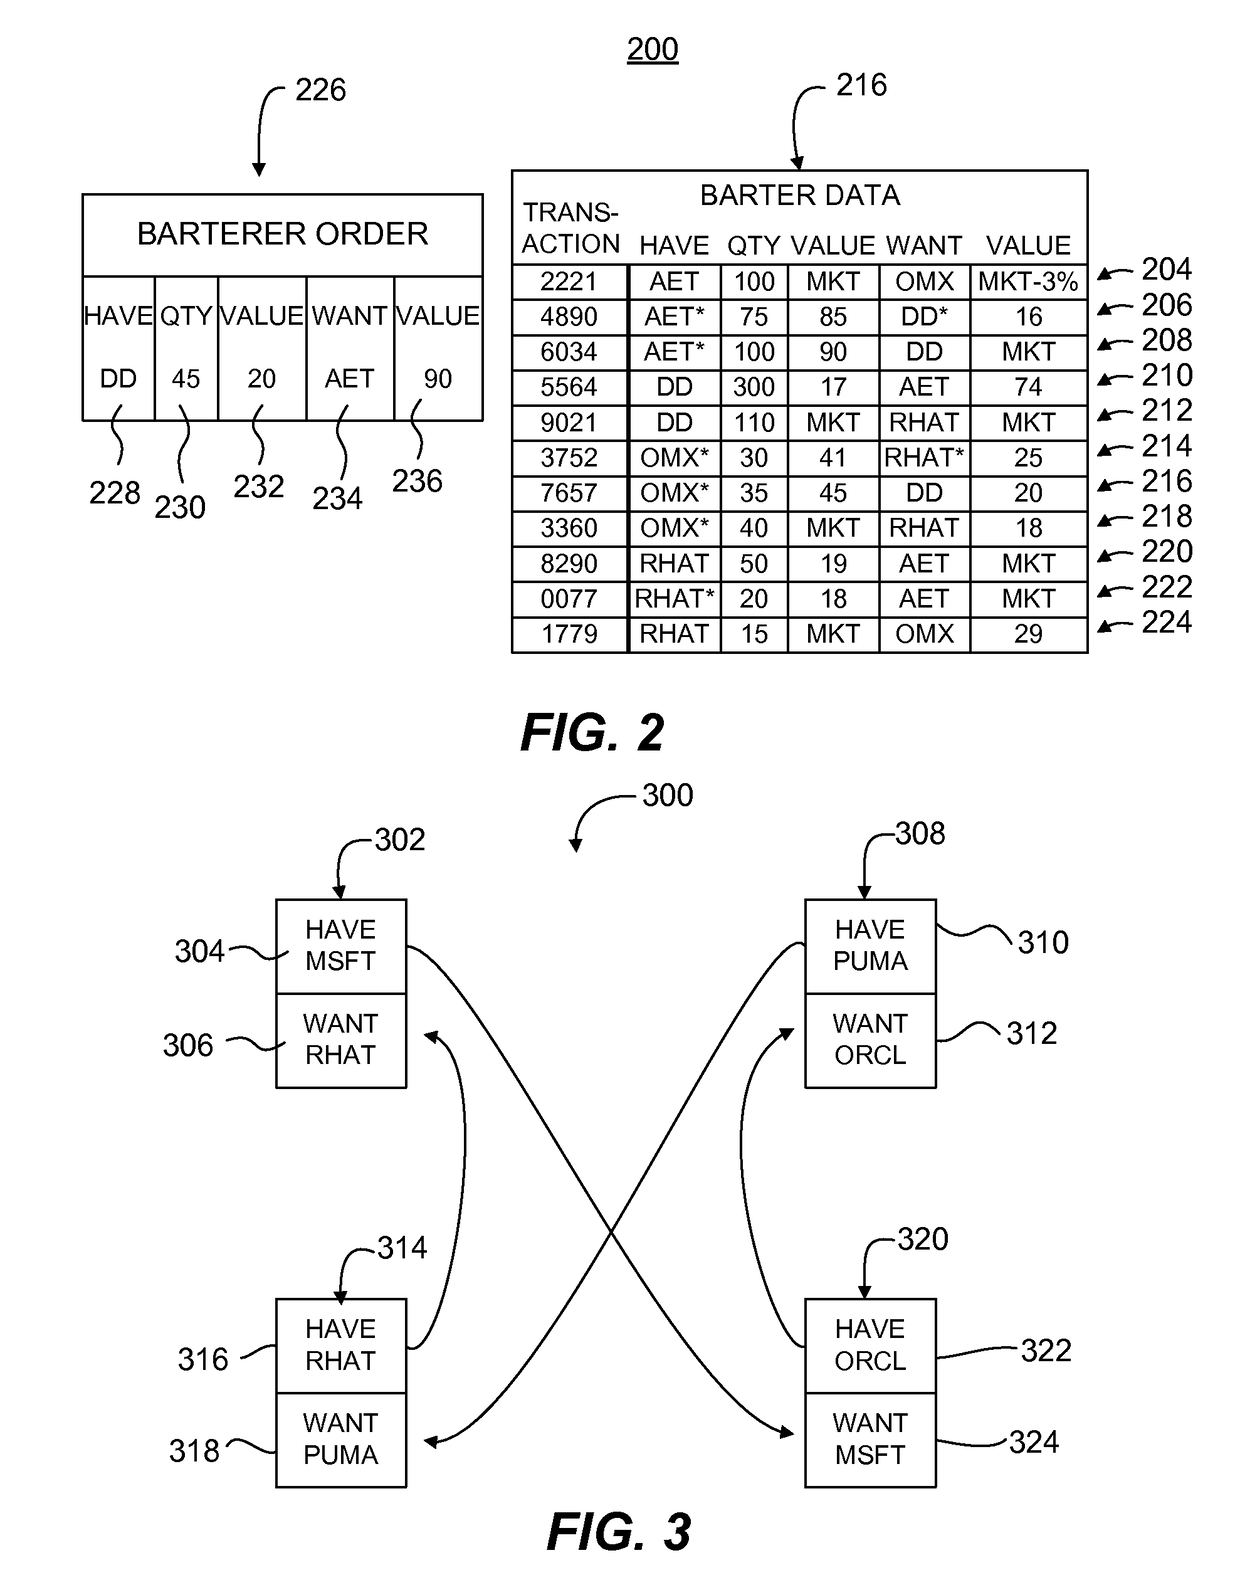 System and method of responding to orders in a securities trading system